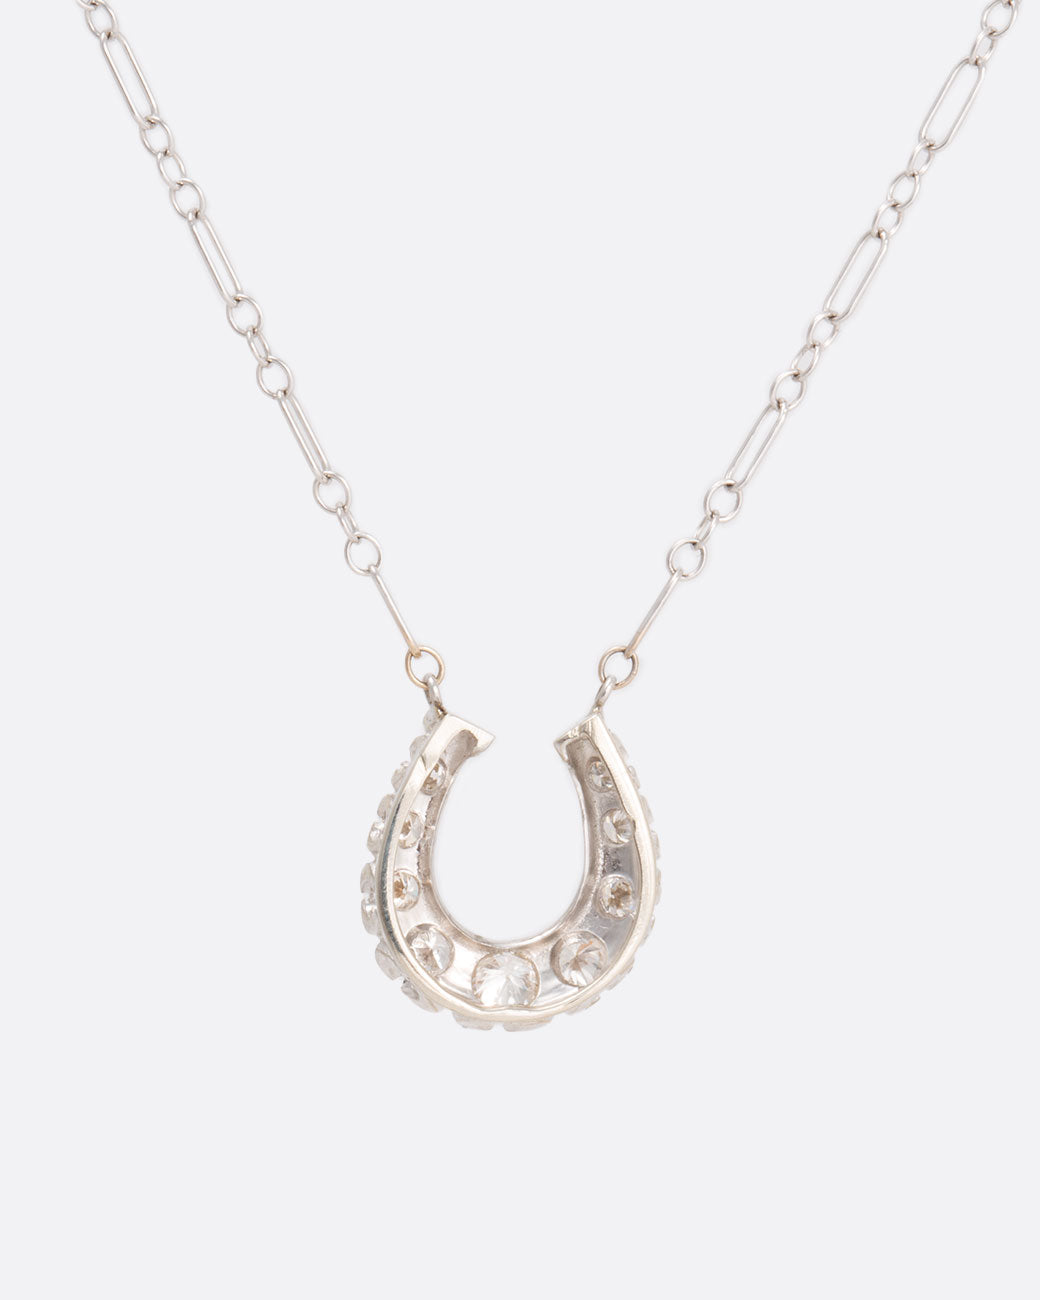 Diamond horseshoe necklace, shown from behind.